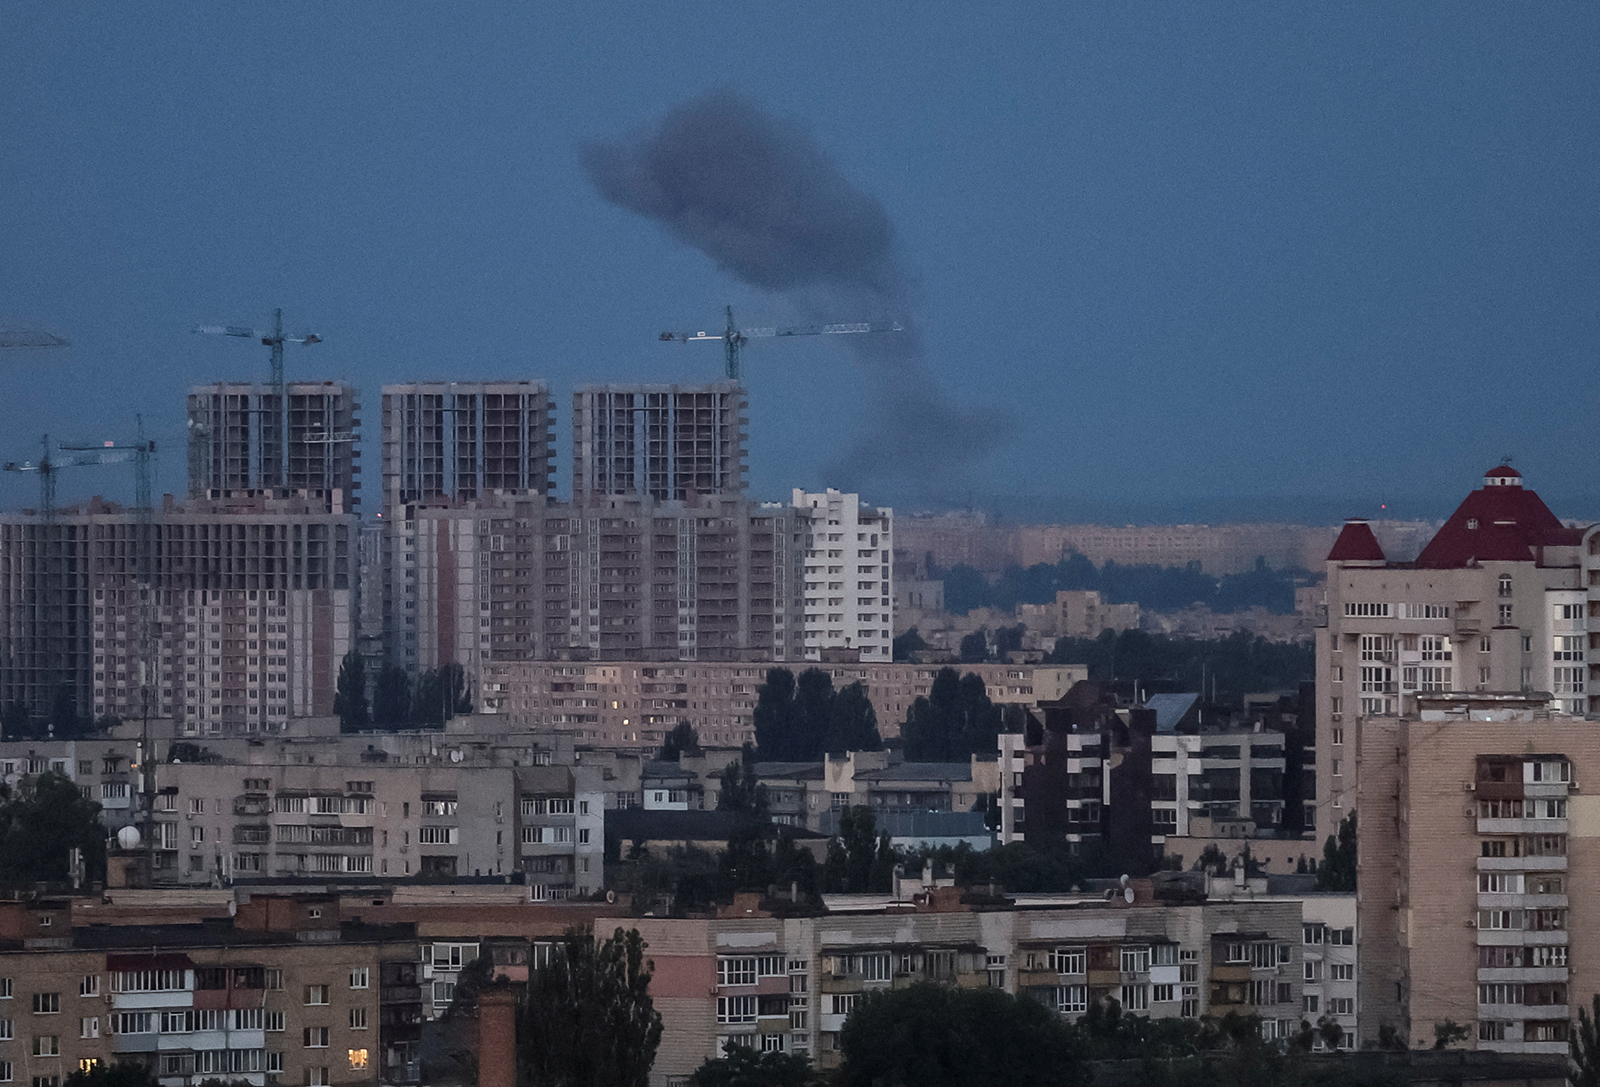 Smoke rises in the sky over the city after a Russian missile strike in Kyiv, Ukraine on September 6.